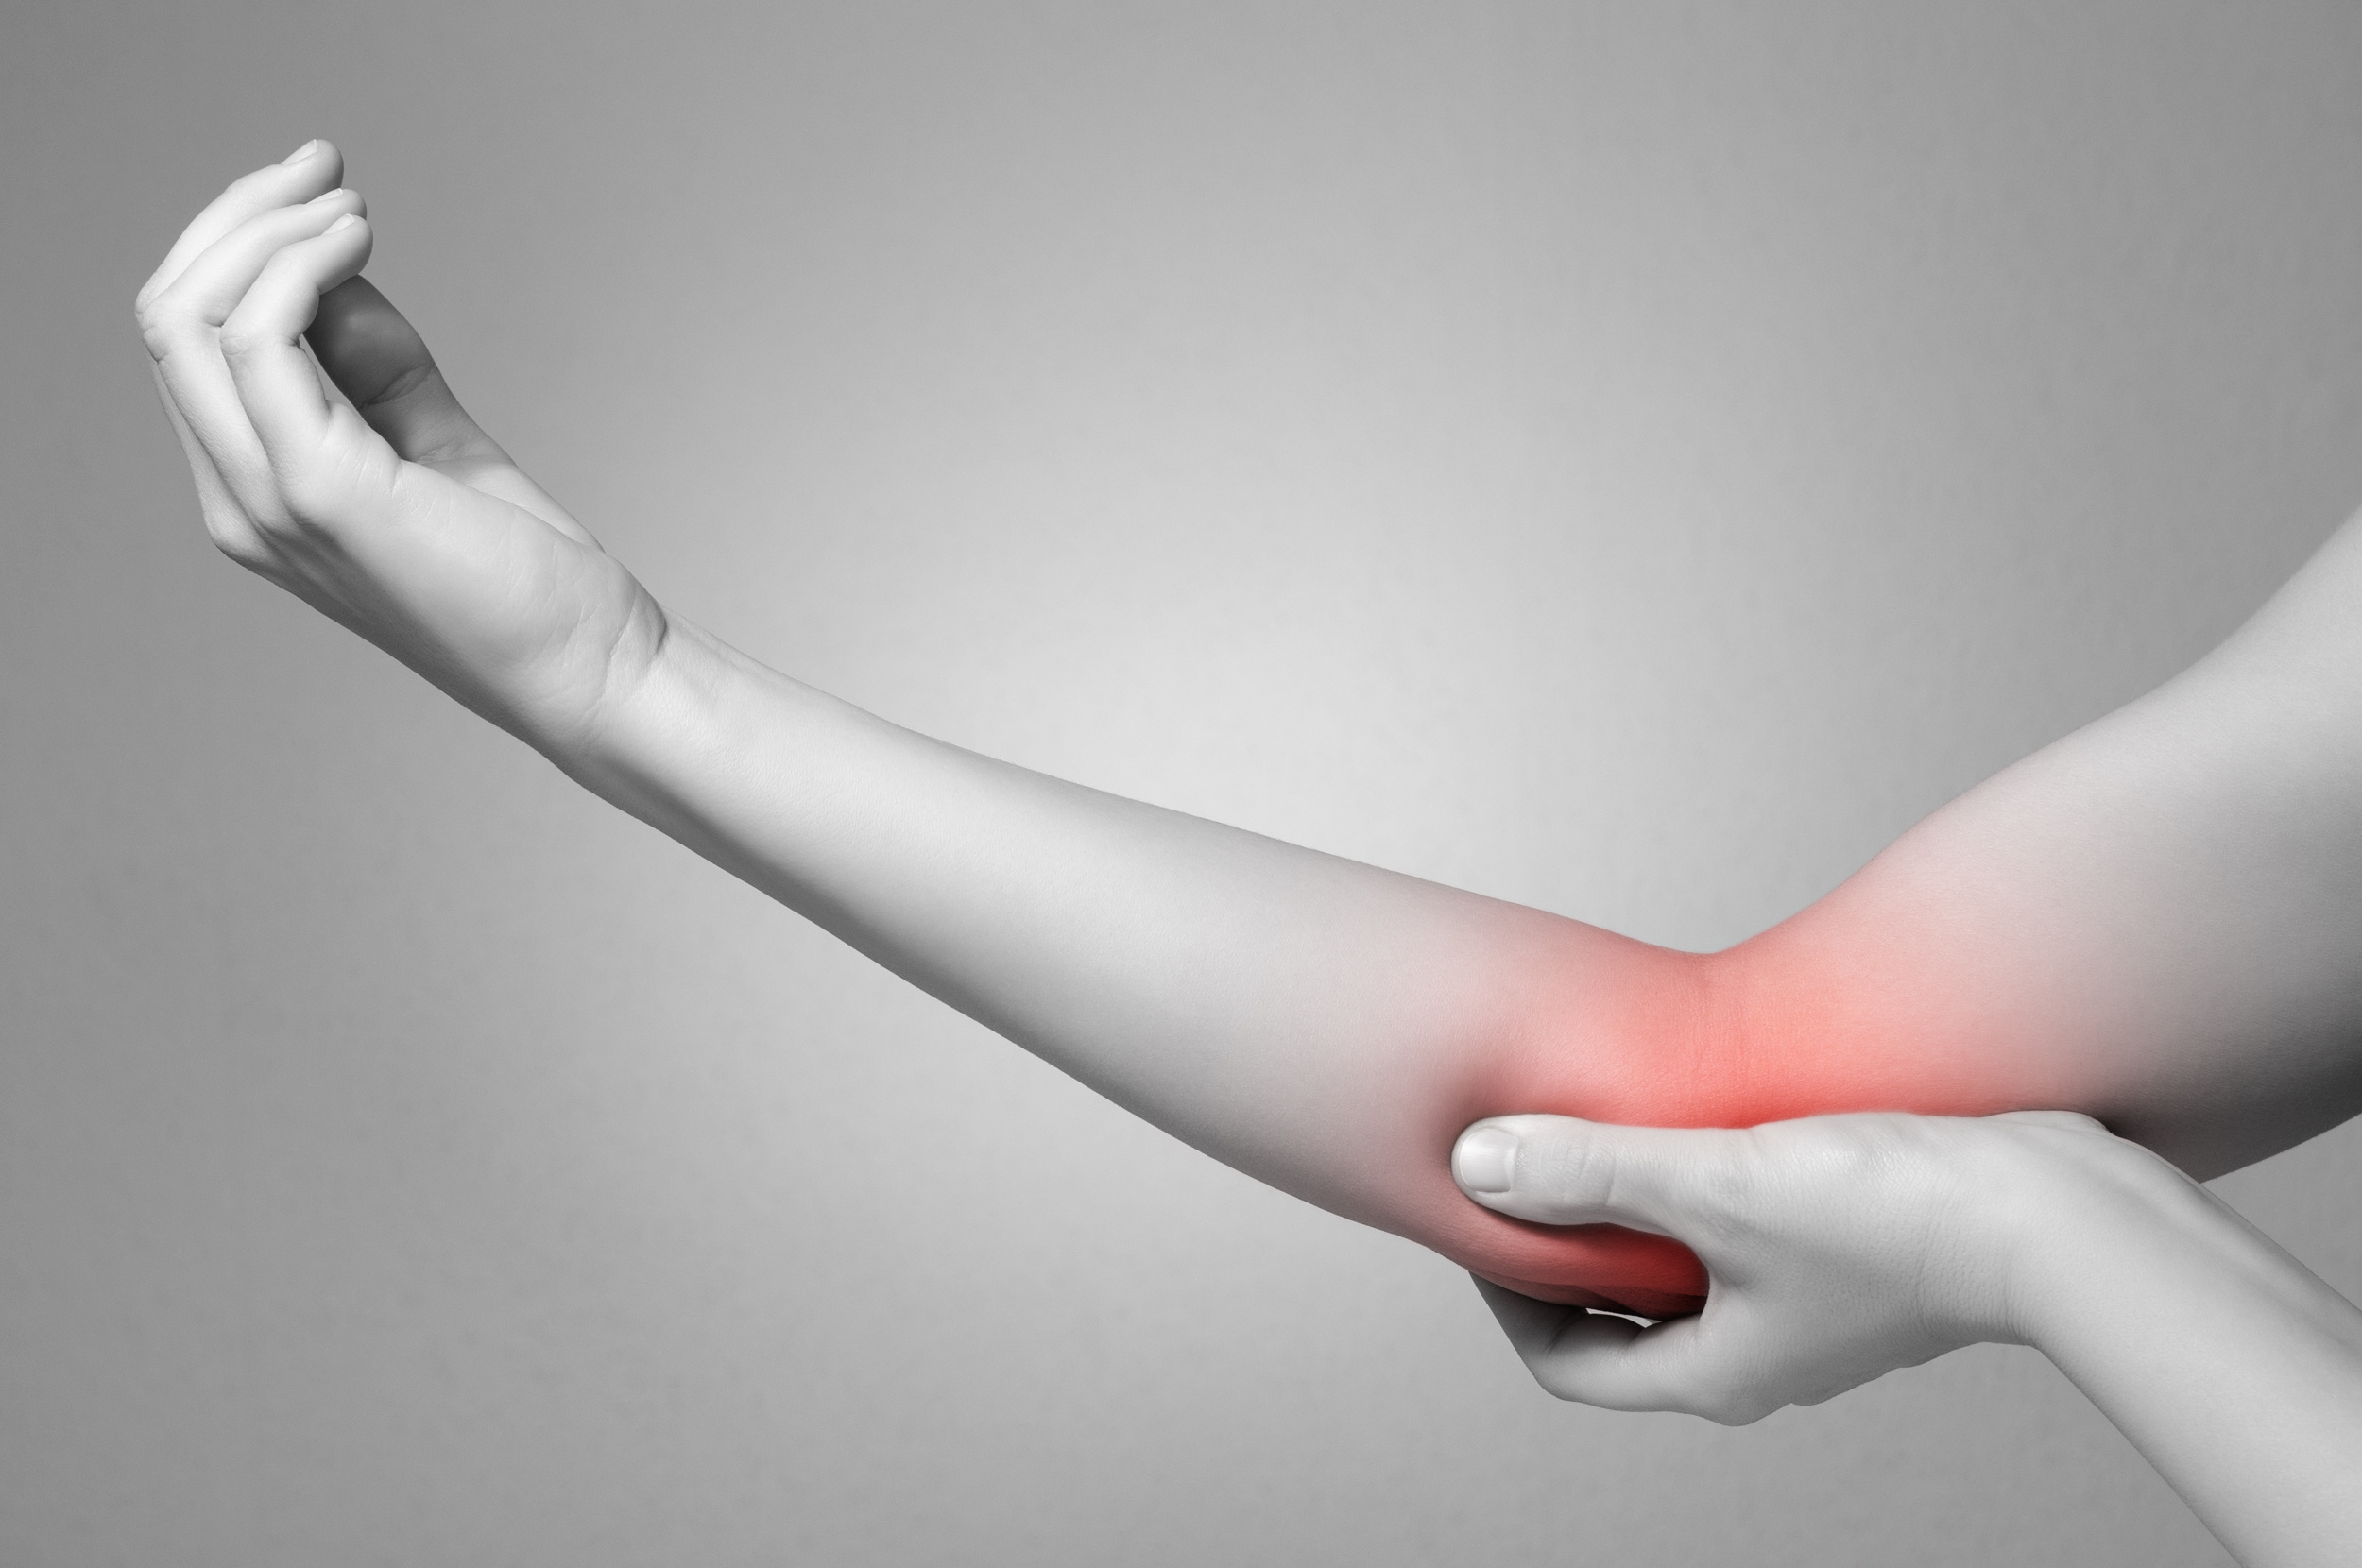 Ulnar nerve entrapment at the elbow (Cubital Tunnel Syndrome